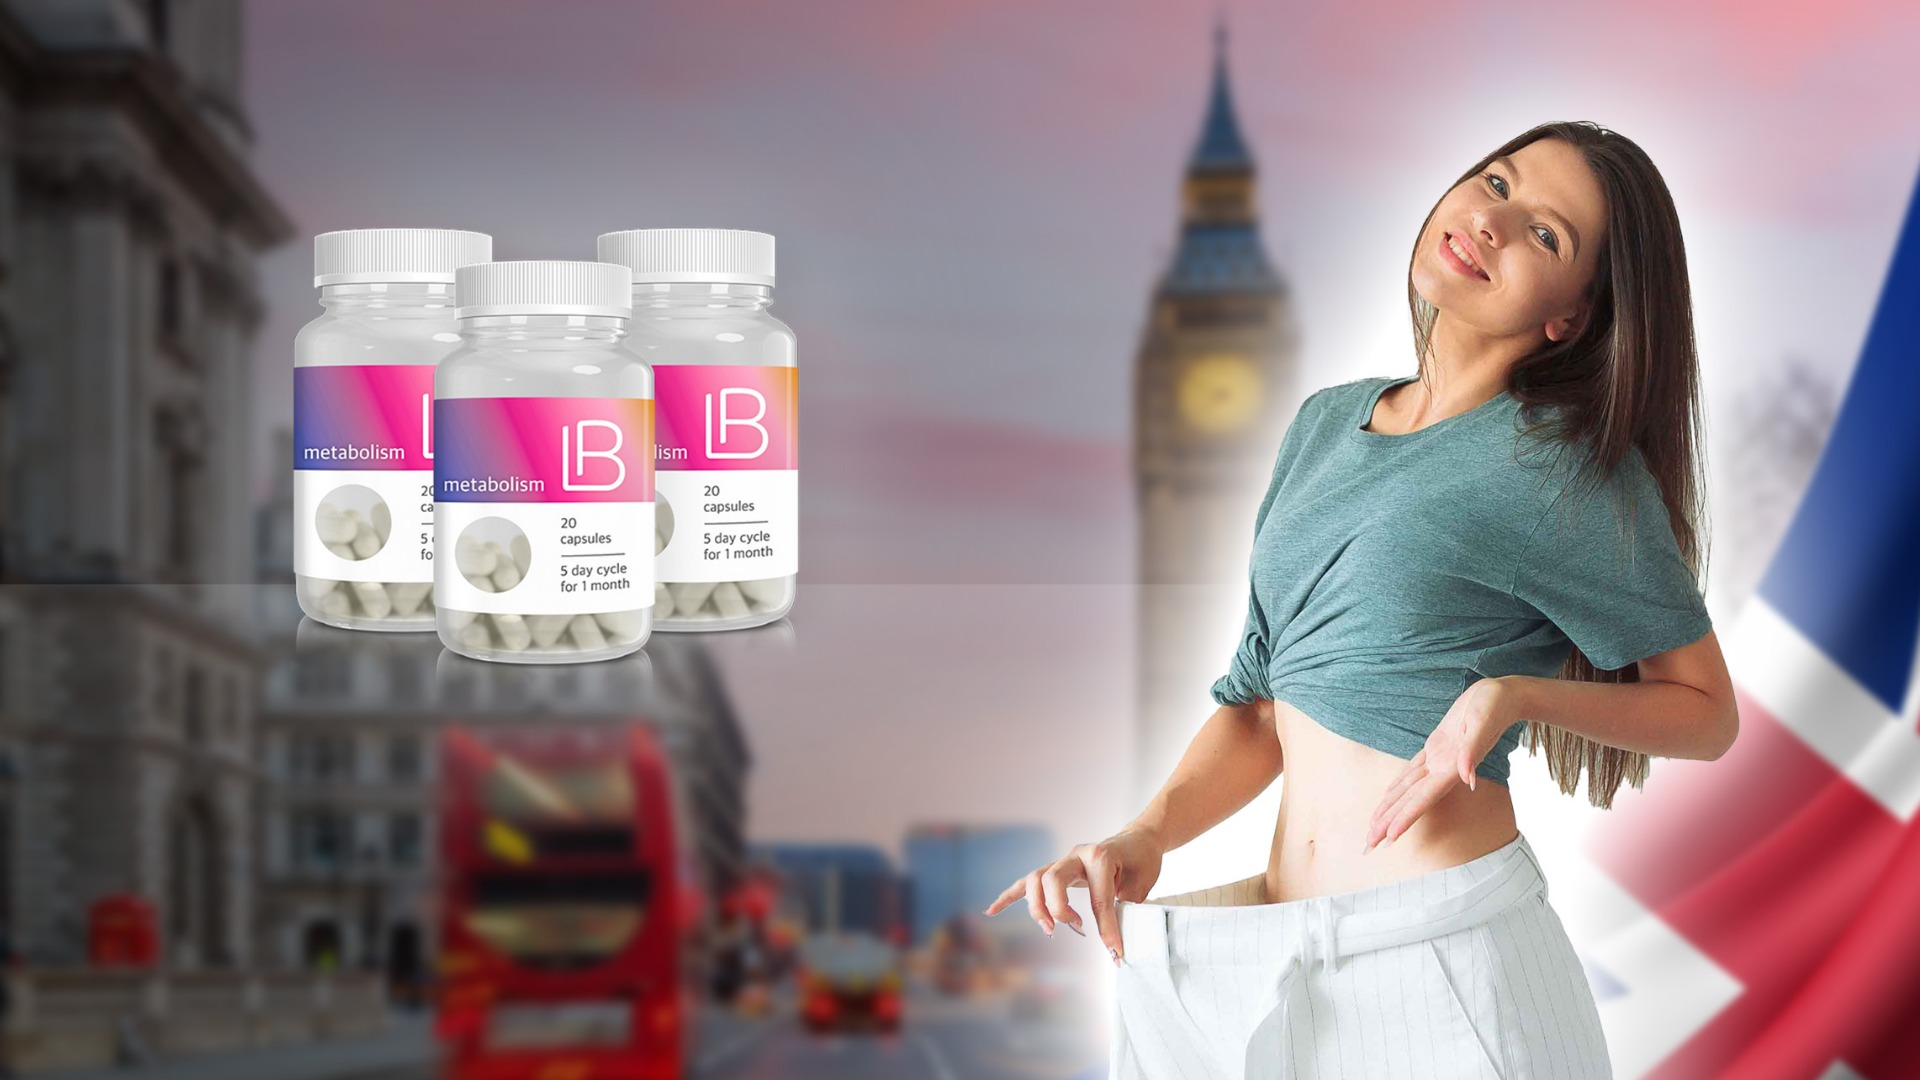 <p><strong>https://ghost4under.com/liba-diet-uk/</strong></p><p><strong>LIBA Diet</strong></p><p>Liba Weight Loss Pills weight loss instances are generally all-around continued and are not viewed as dangerous. The fixings are just everyday substances that may be taken moving along and upload to weight decrease. Nonetheless, two matters have to be taken into consideration. One is the dimension recommendations, and the opposite is sensitivities.</p><p></p>